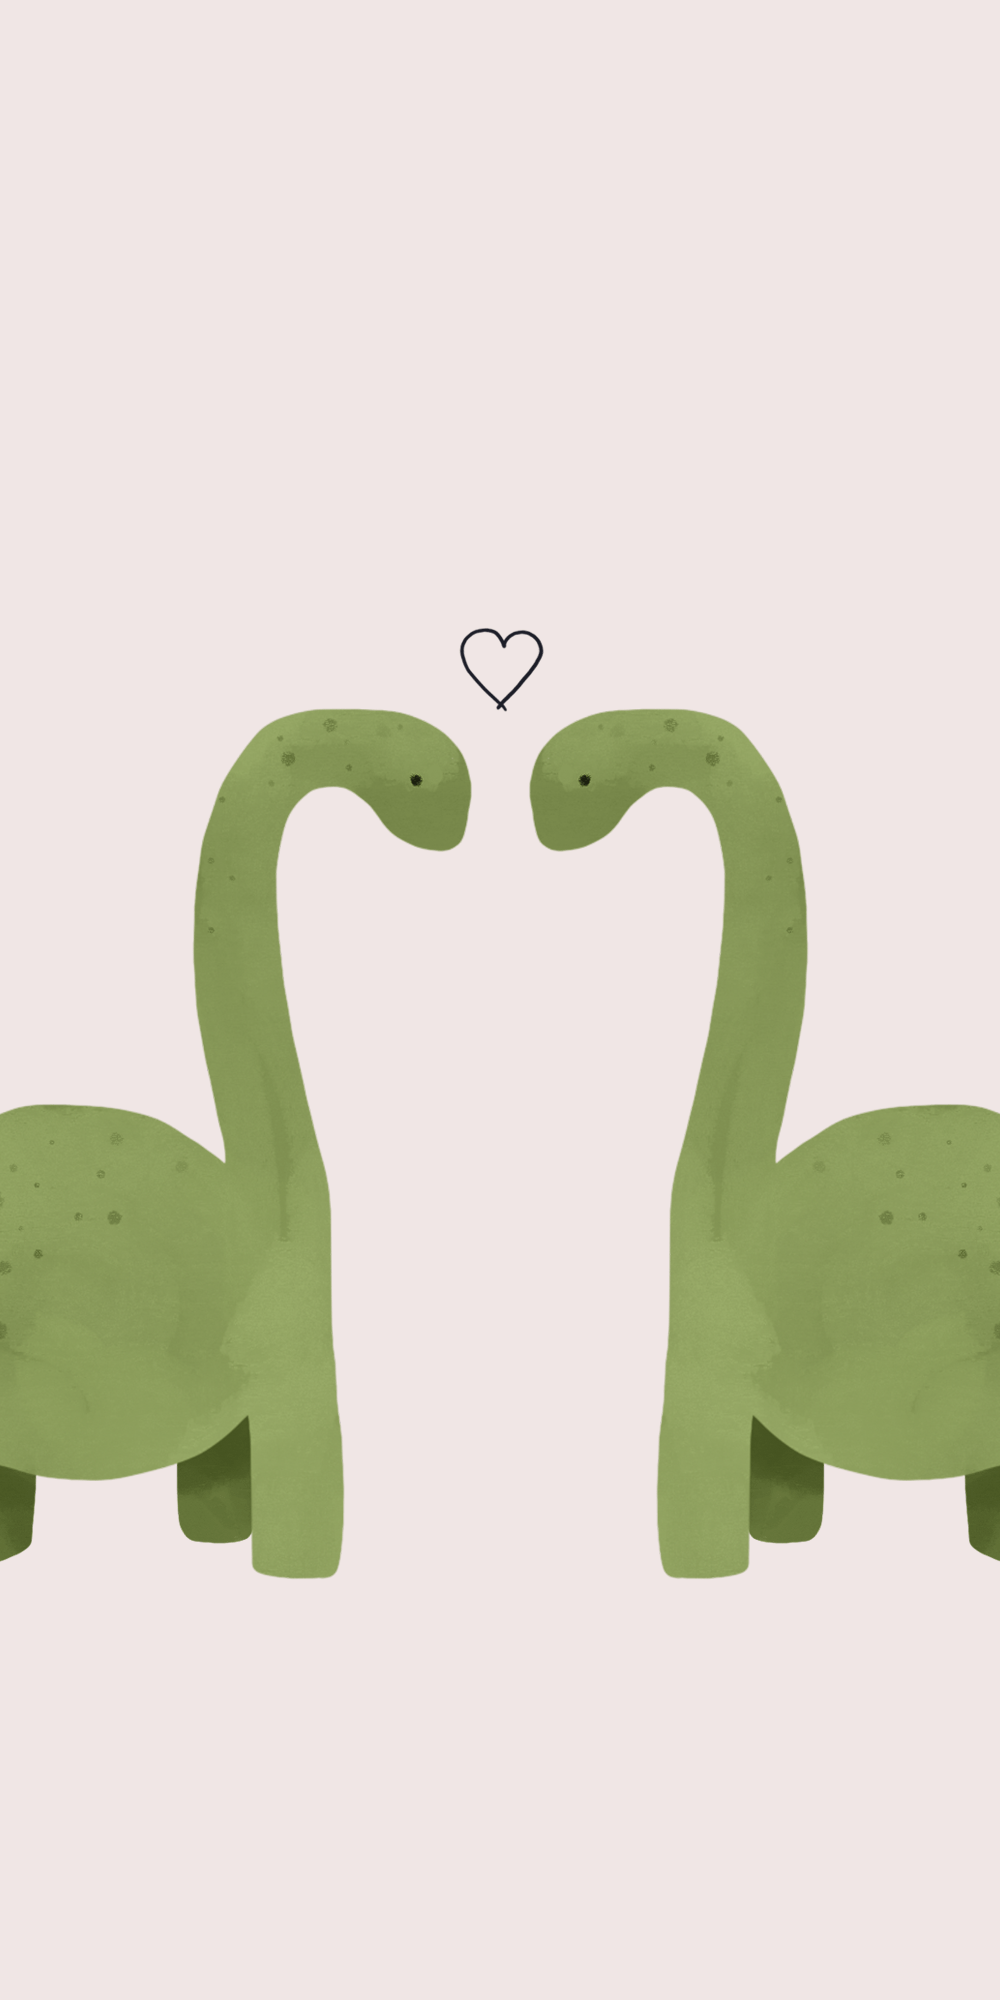 Dinosaur iPhone Wallpapers - Top Free Dinosaur iPhone Backgrounds